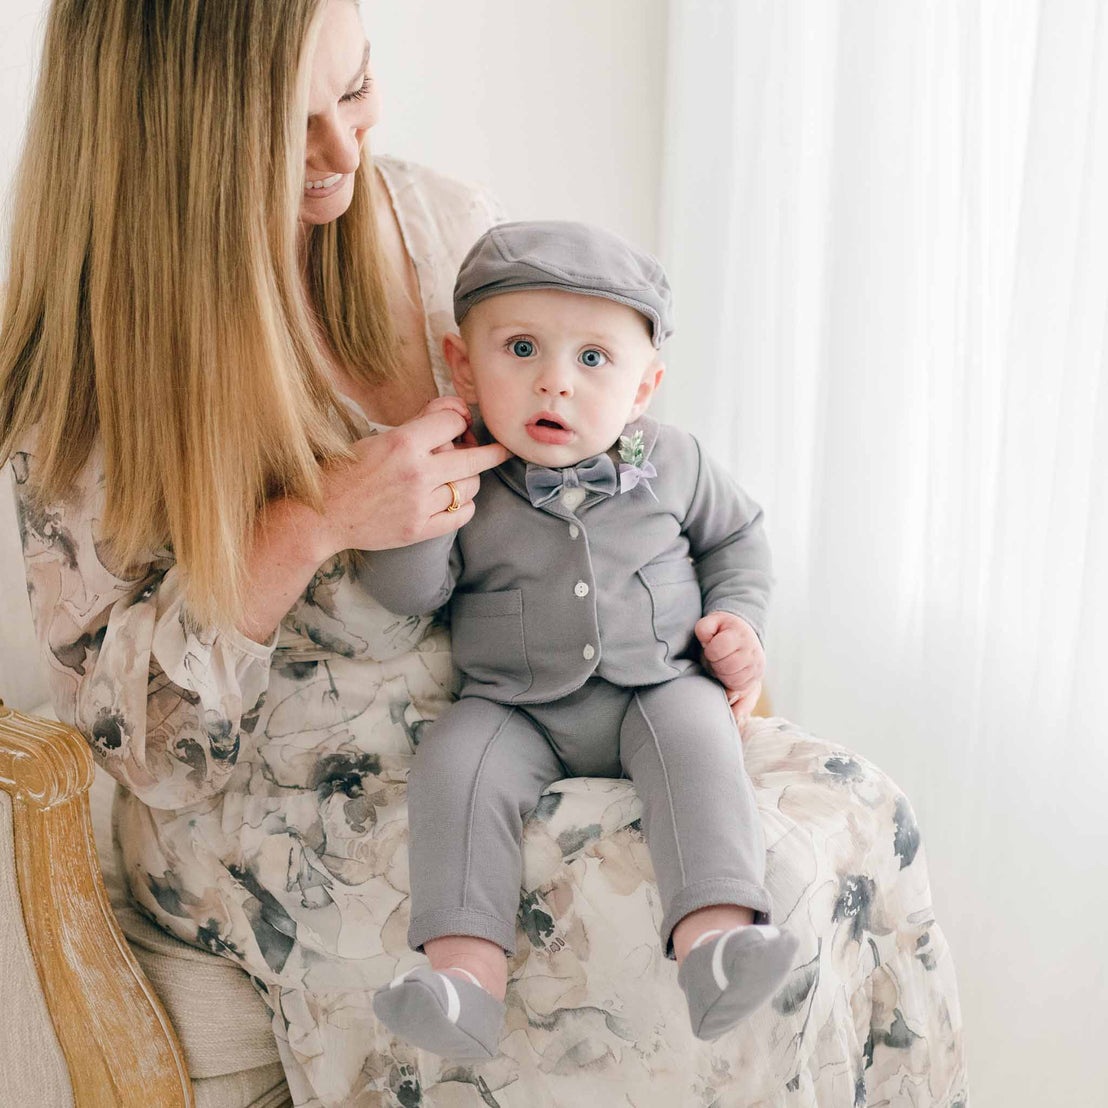 Baby boy in grey cotton suit holding mom's finger in lap